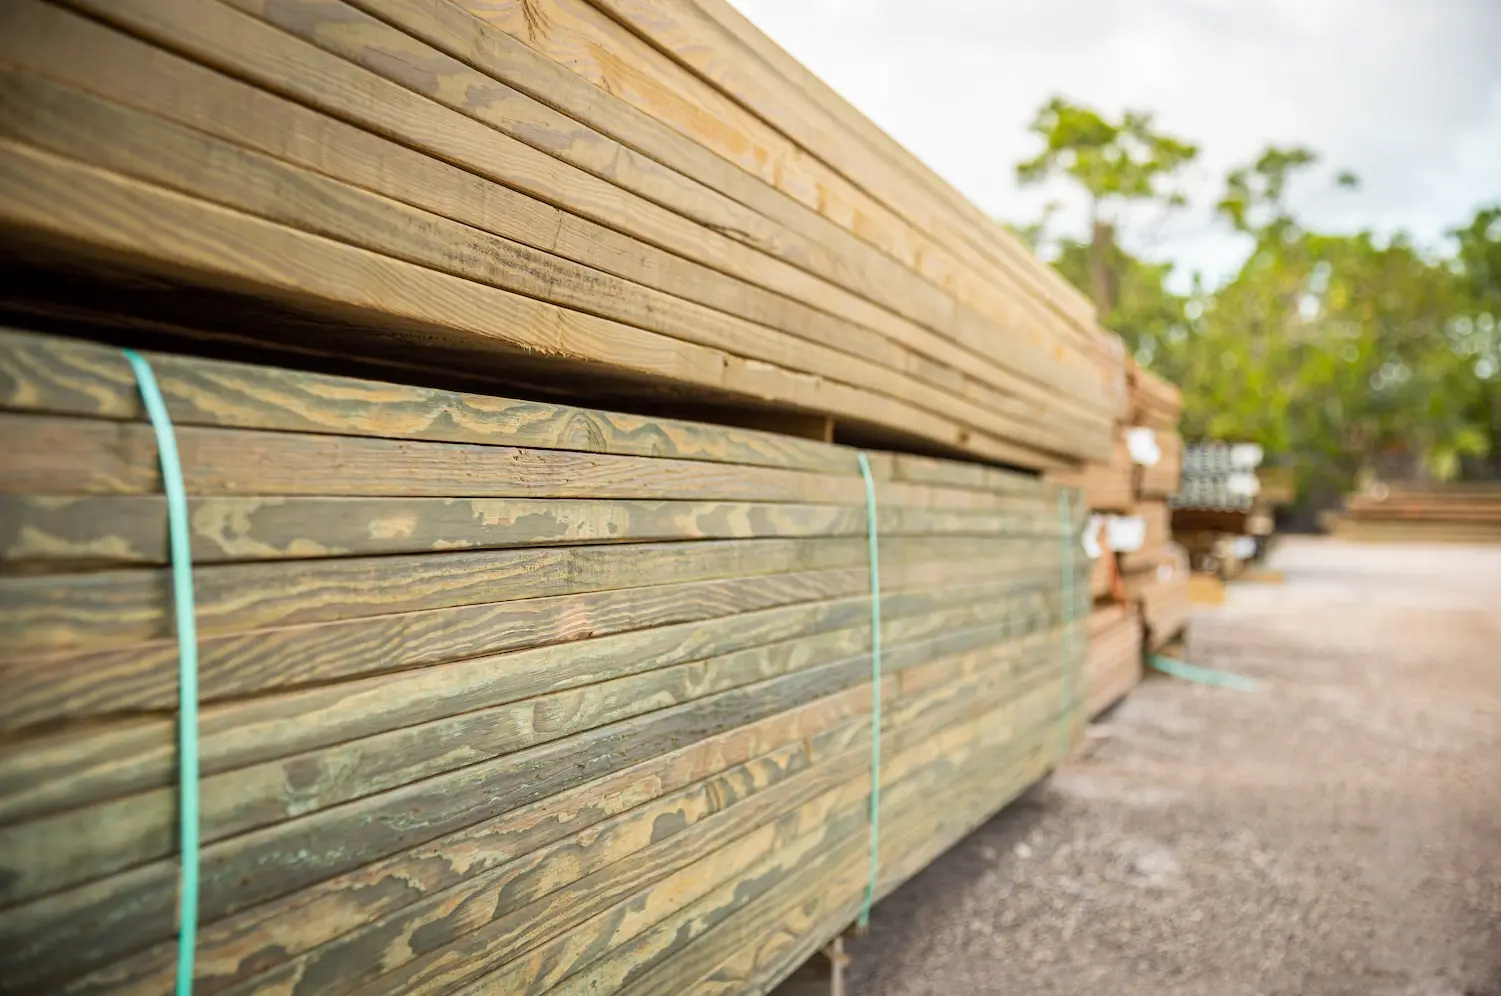 lumber yard. learn more about harbor exports today